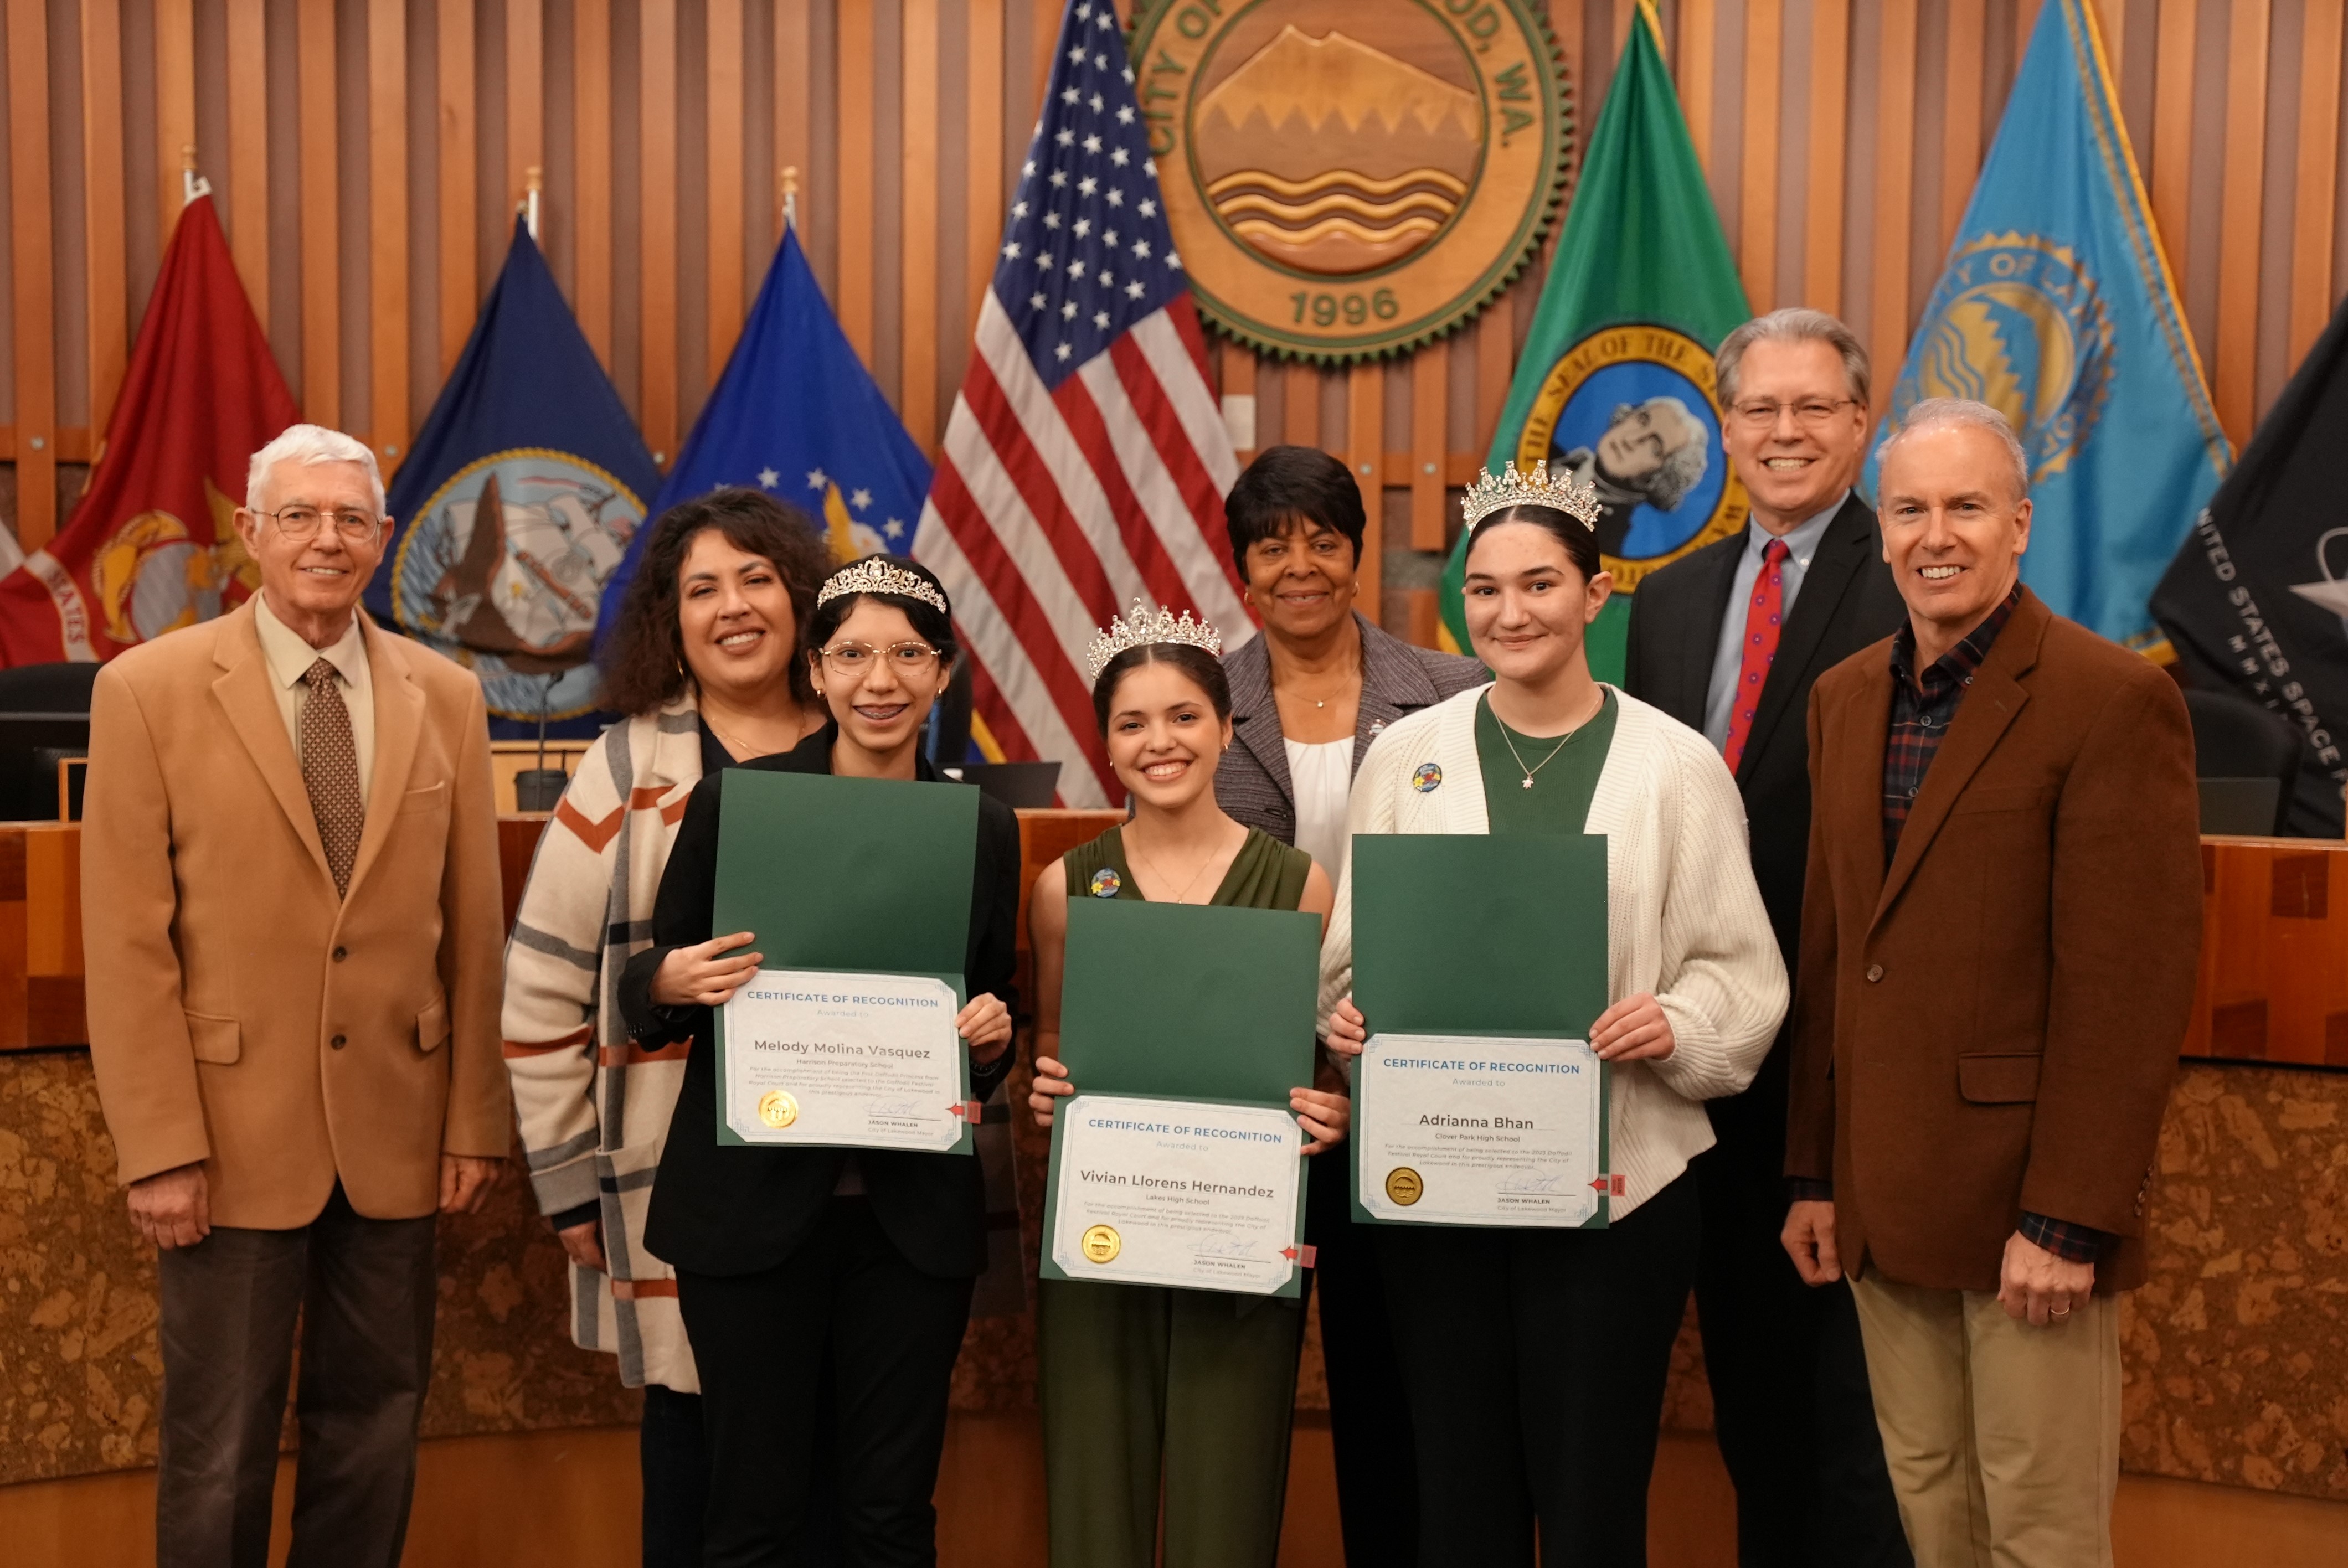 Members of the 2023 Daffodil Festival Royal Court stand with the Lakewood City Council holding certificates in the Lakewood Council Chambers.